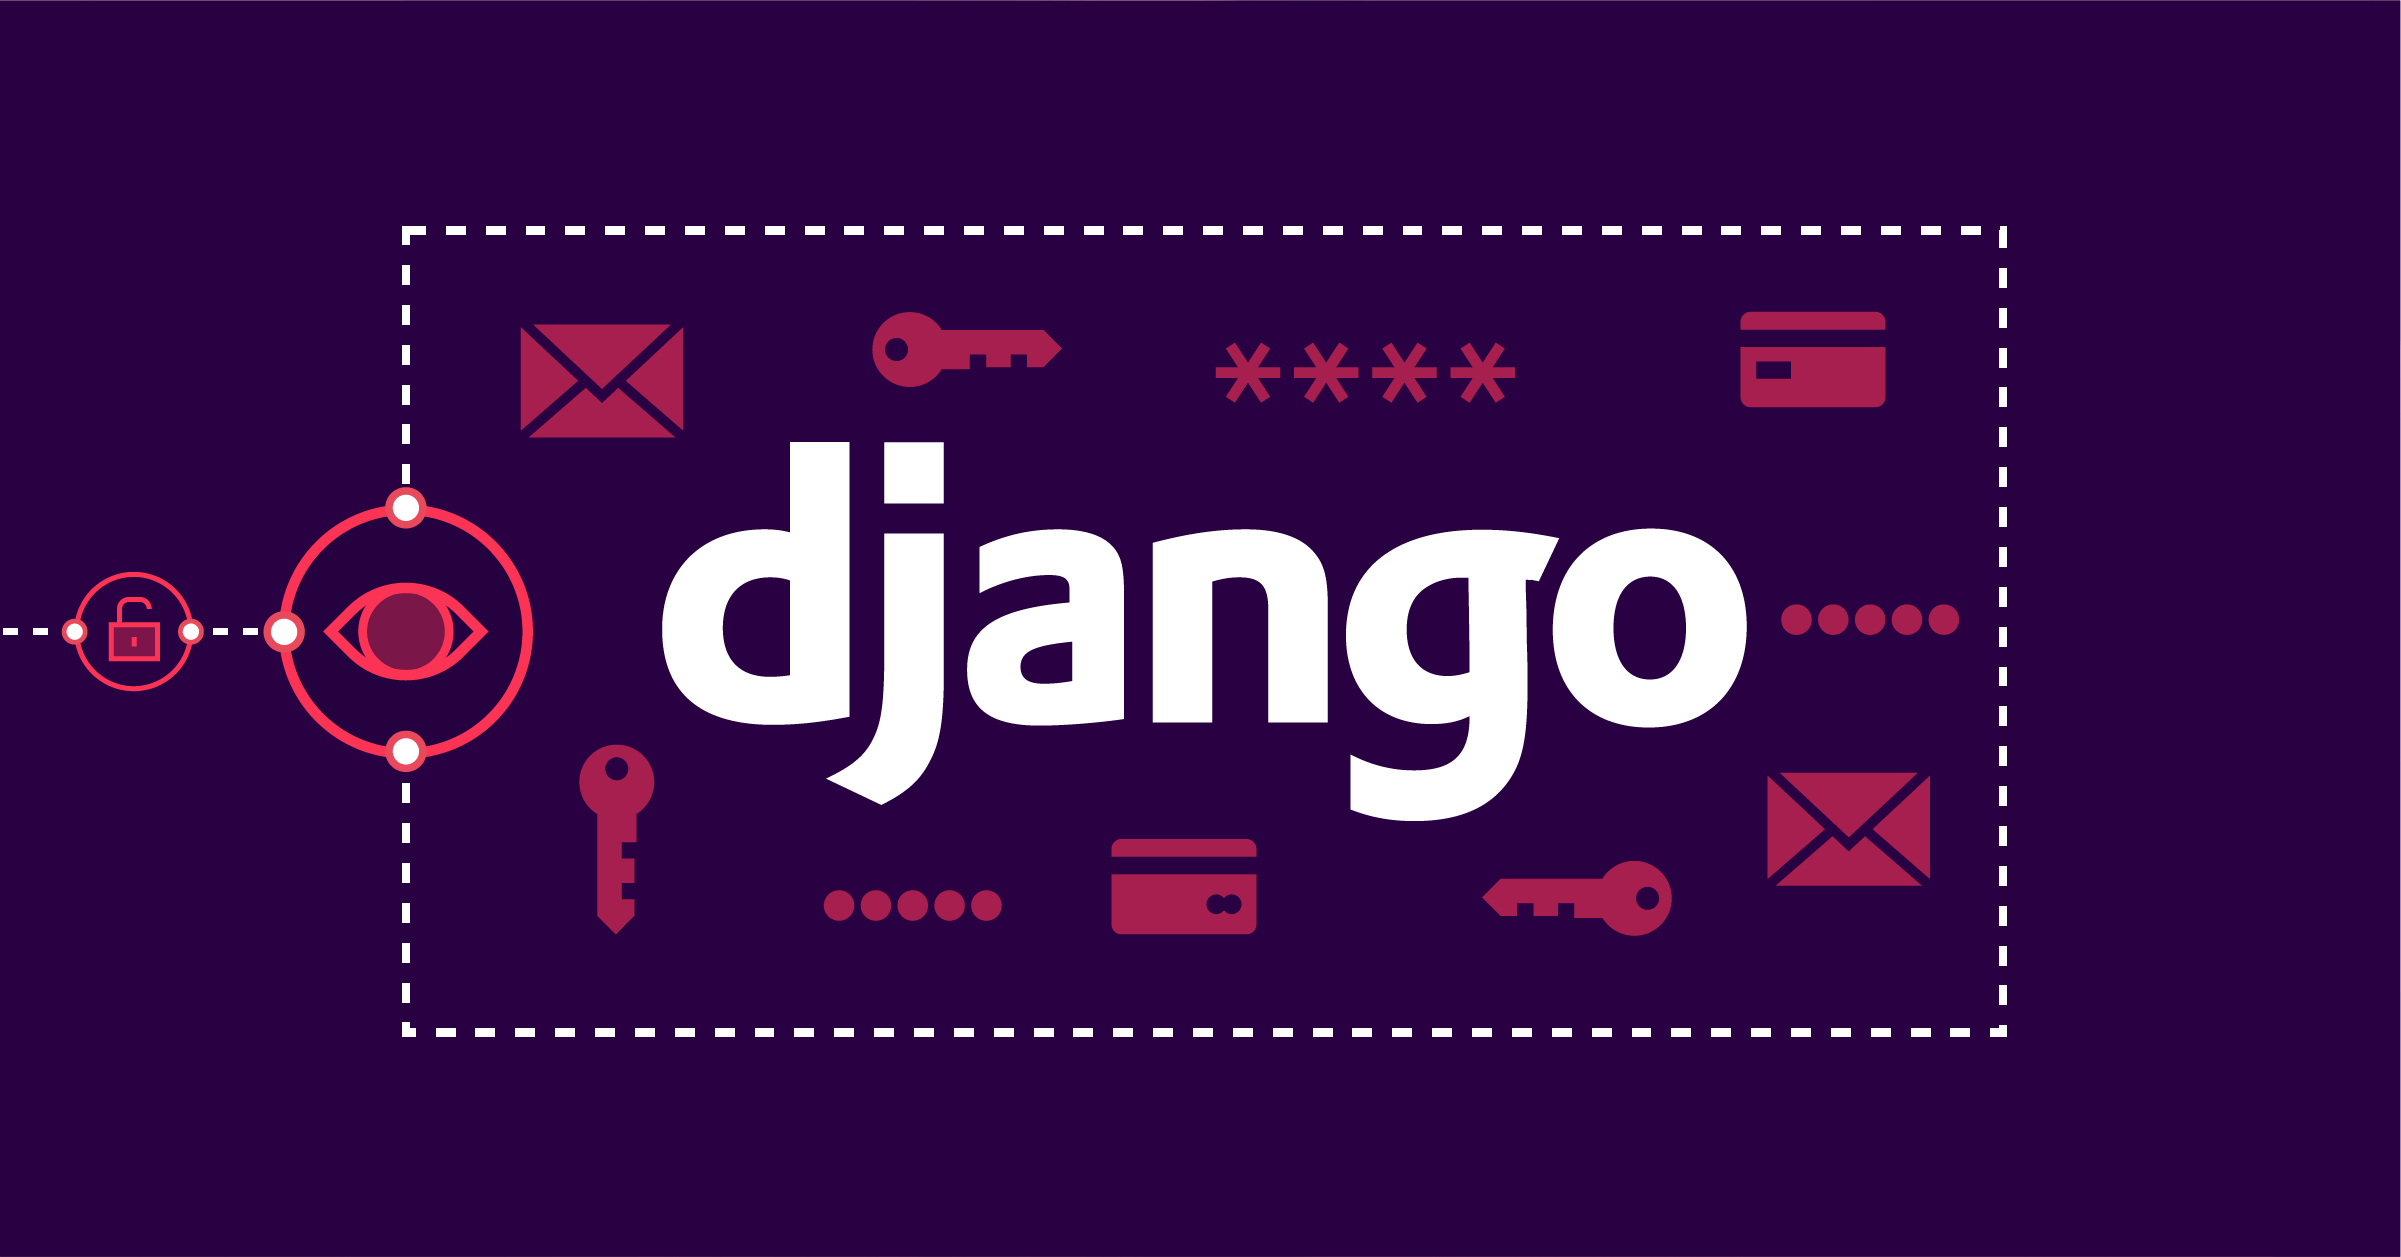 We recently found a vulnerability in Django that allows us to disclose sensitive information. Let’s review the root cause, exploiting technique, and patch.